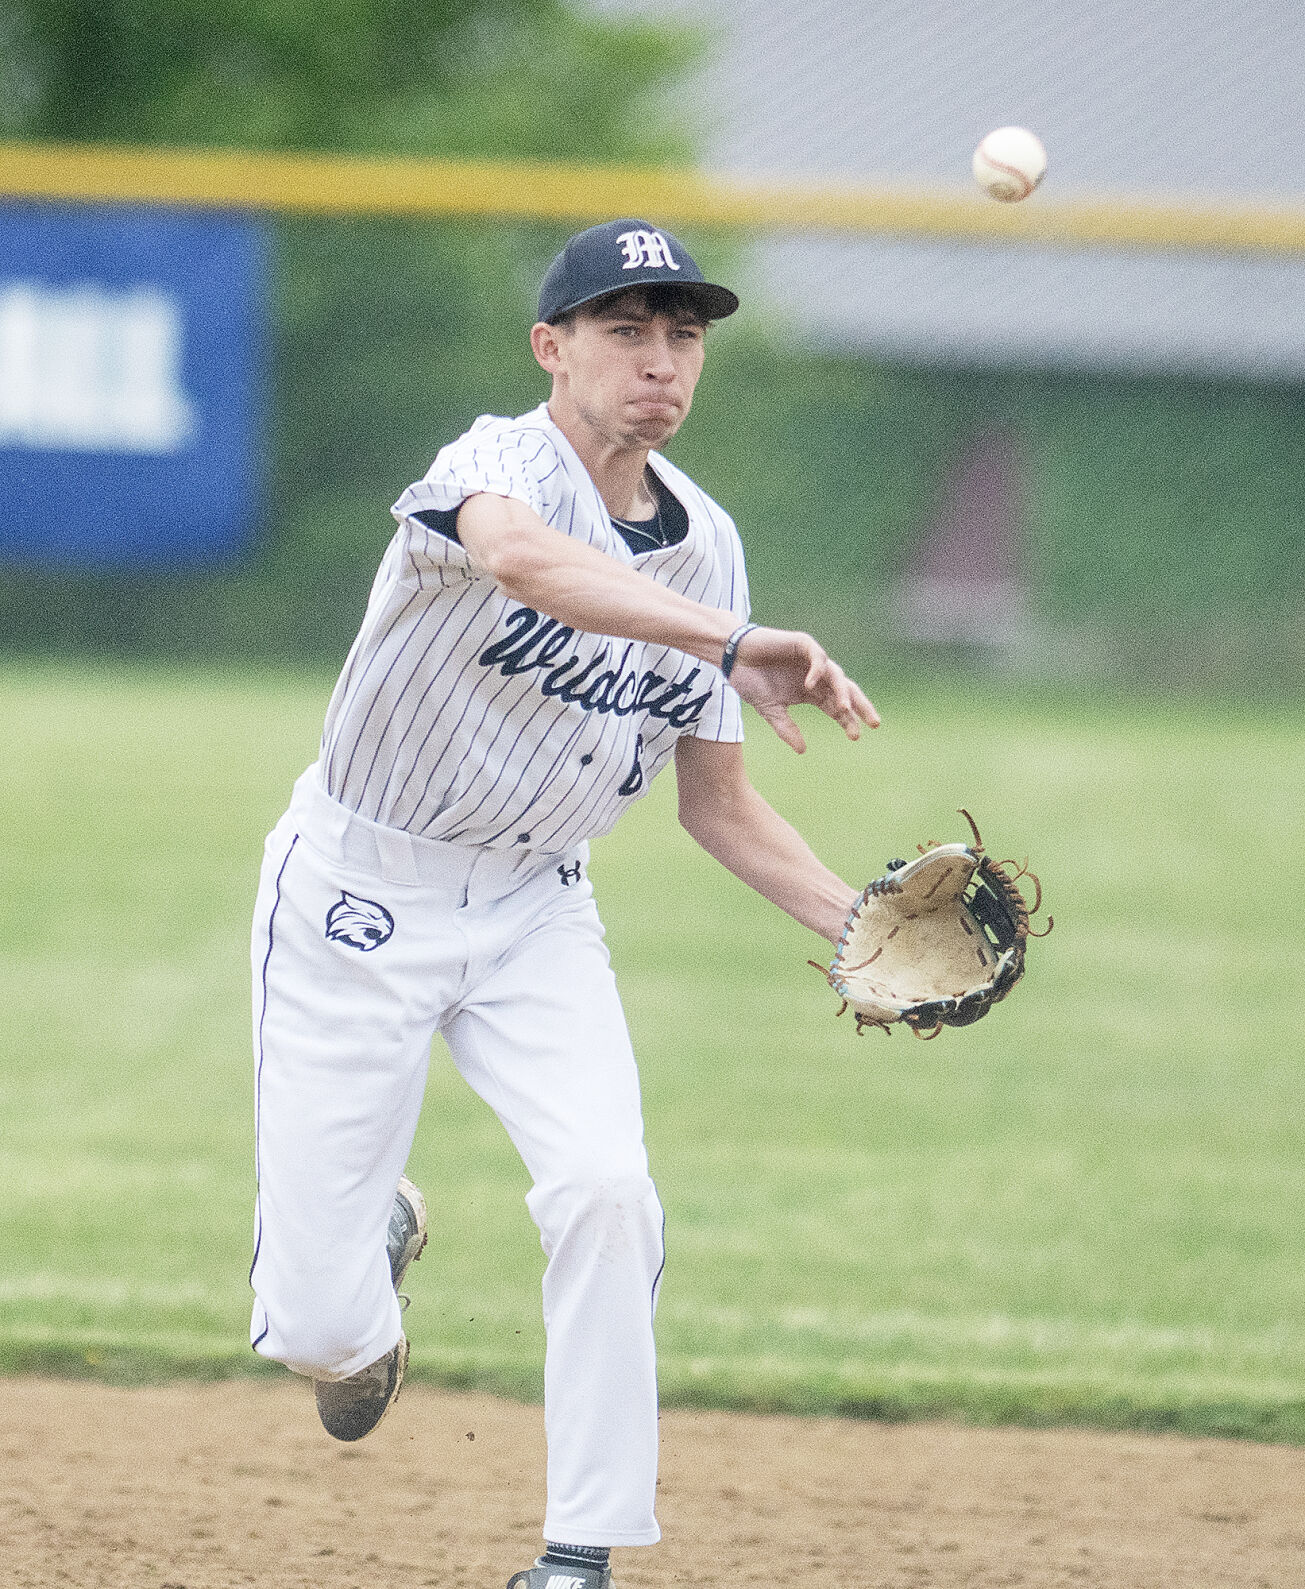 Valley’s Eight Baseball Teams Qualify for Districts: Danville Leads Class 4A, Selinsgrove No. 1 in 5A